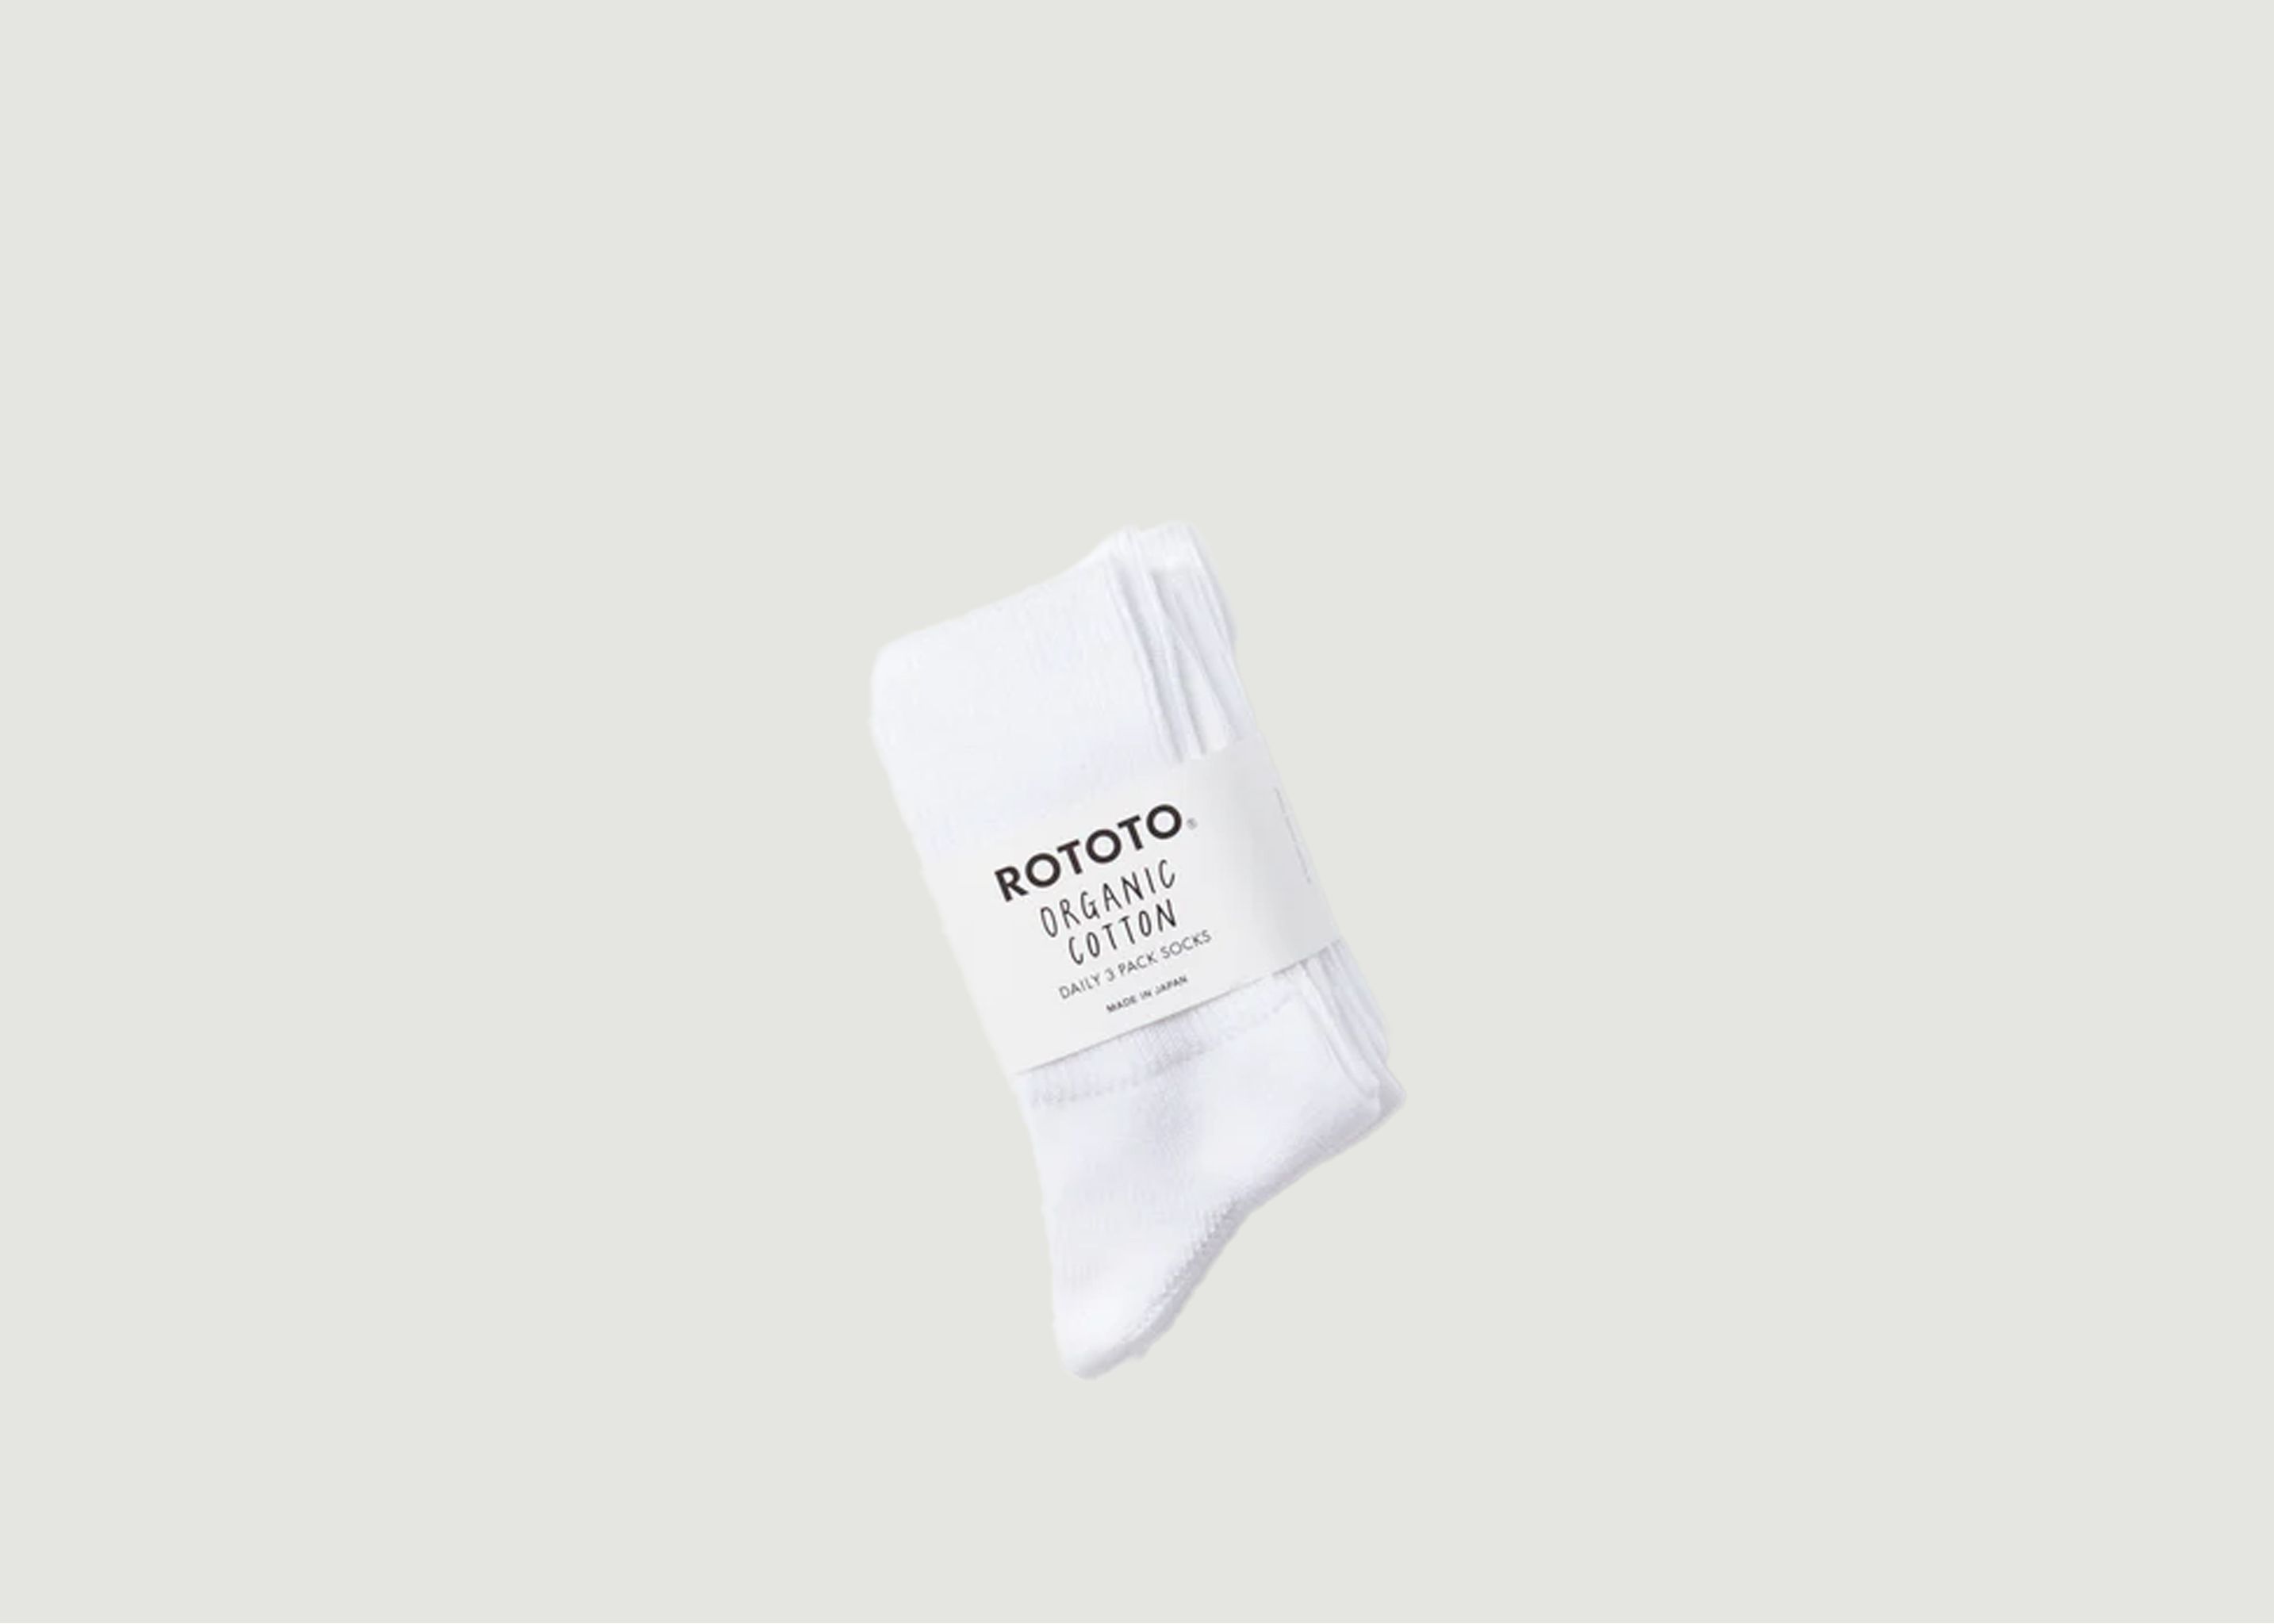 Pack of 3 pairs of socks R1427 - Rototo